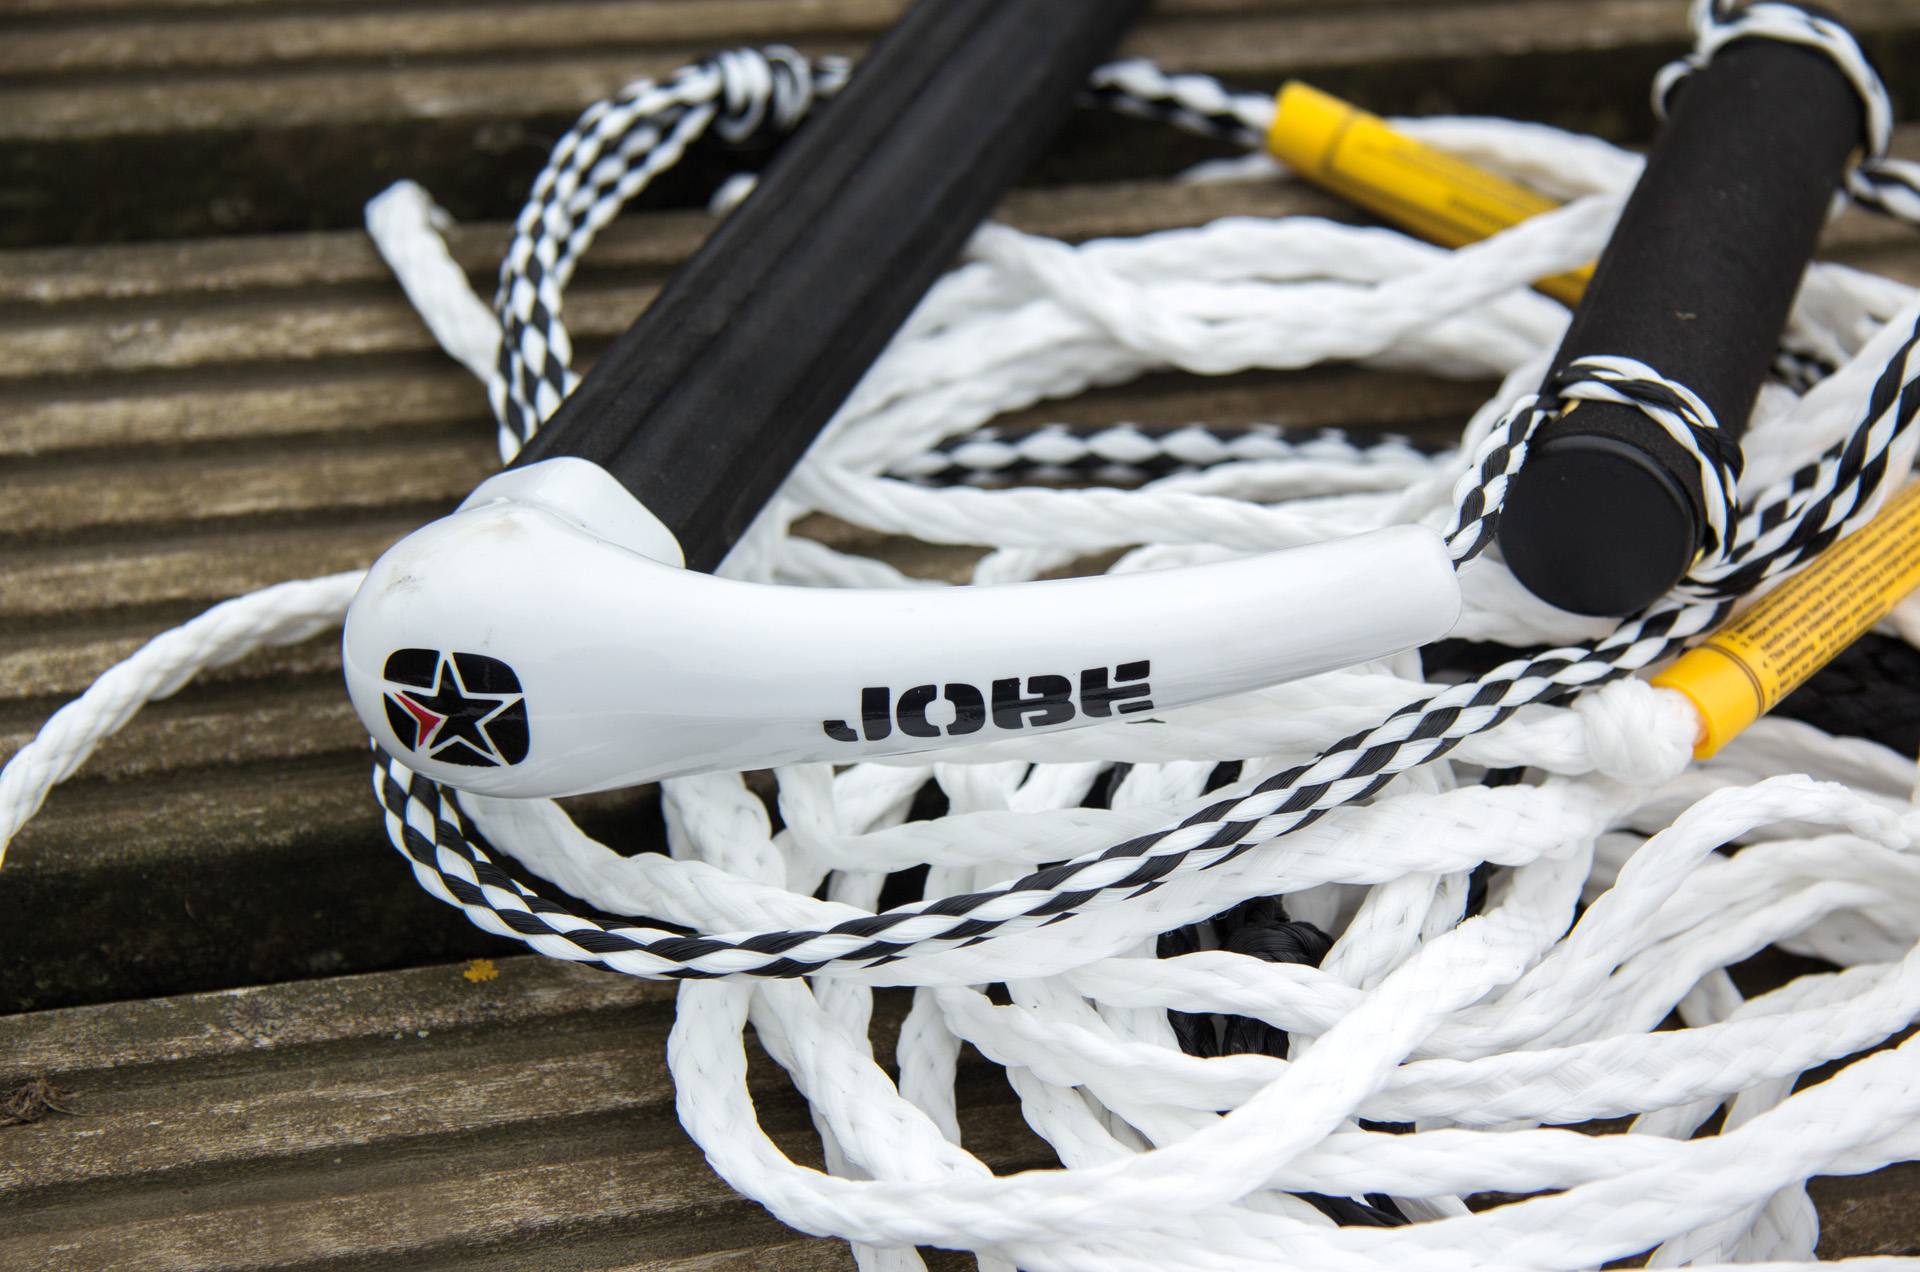 Product highlight: extensive range of ropes and handles